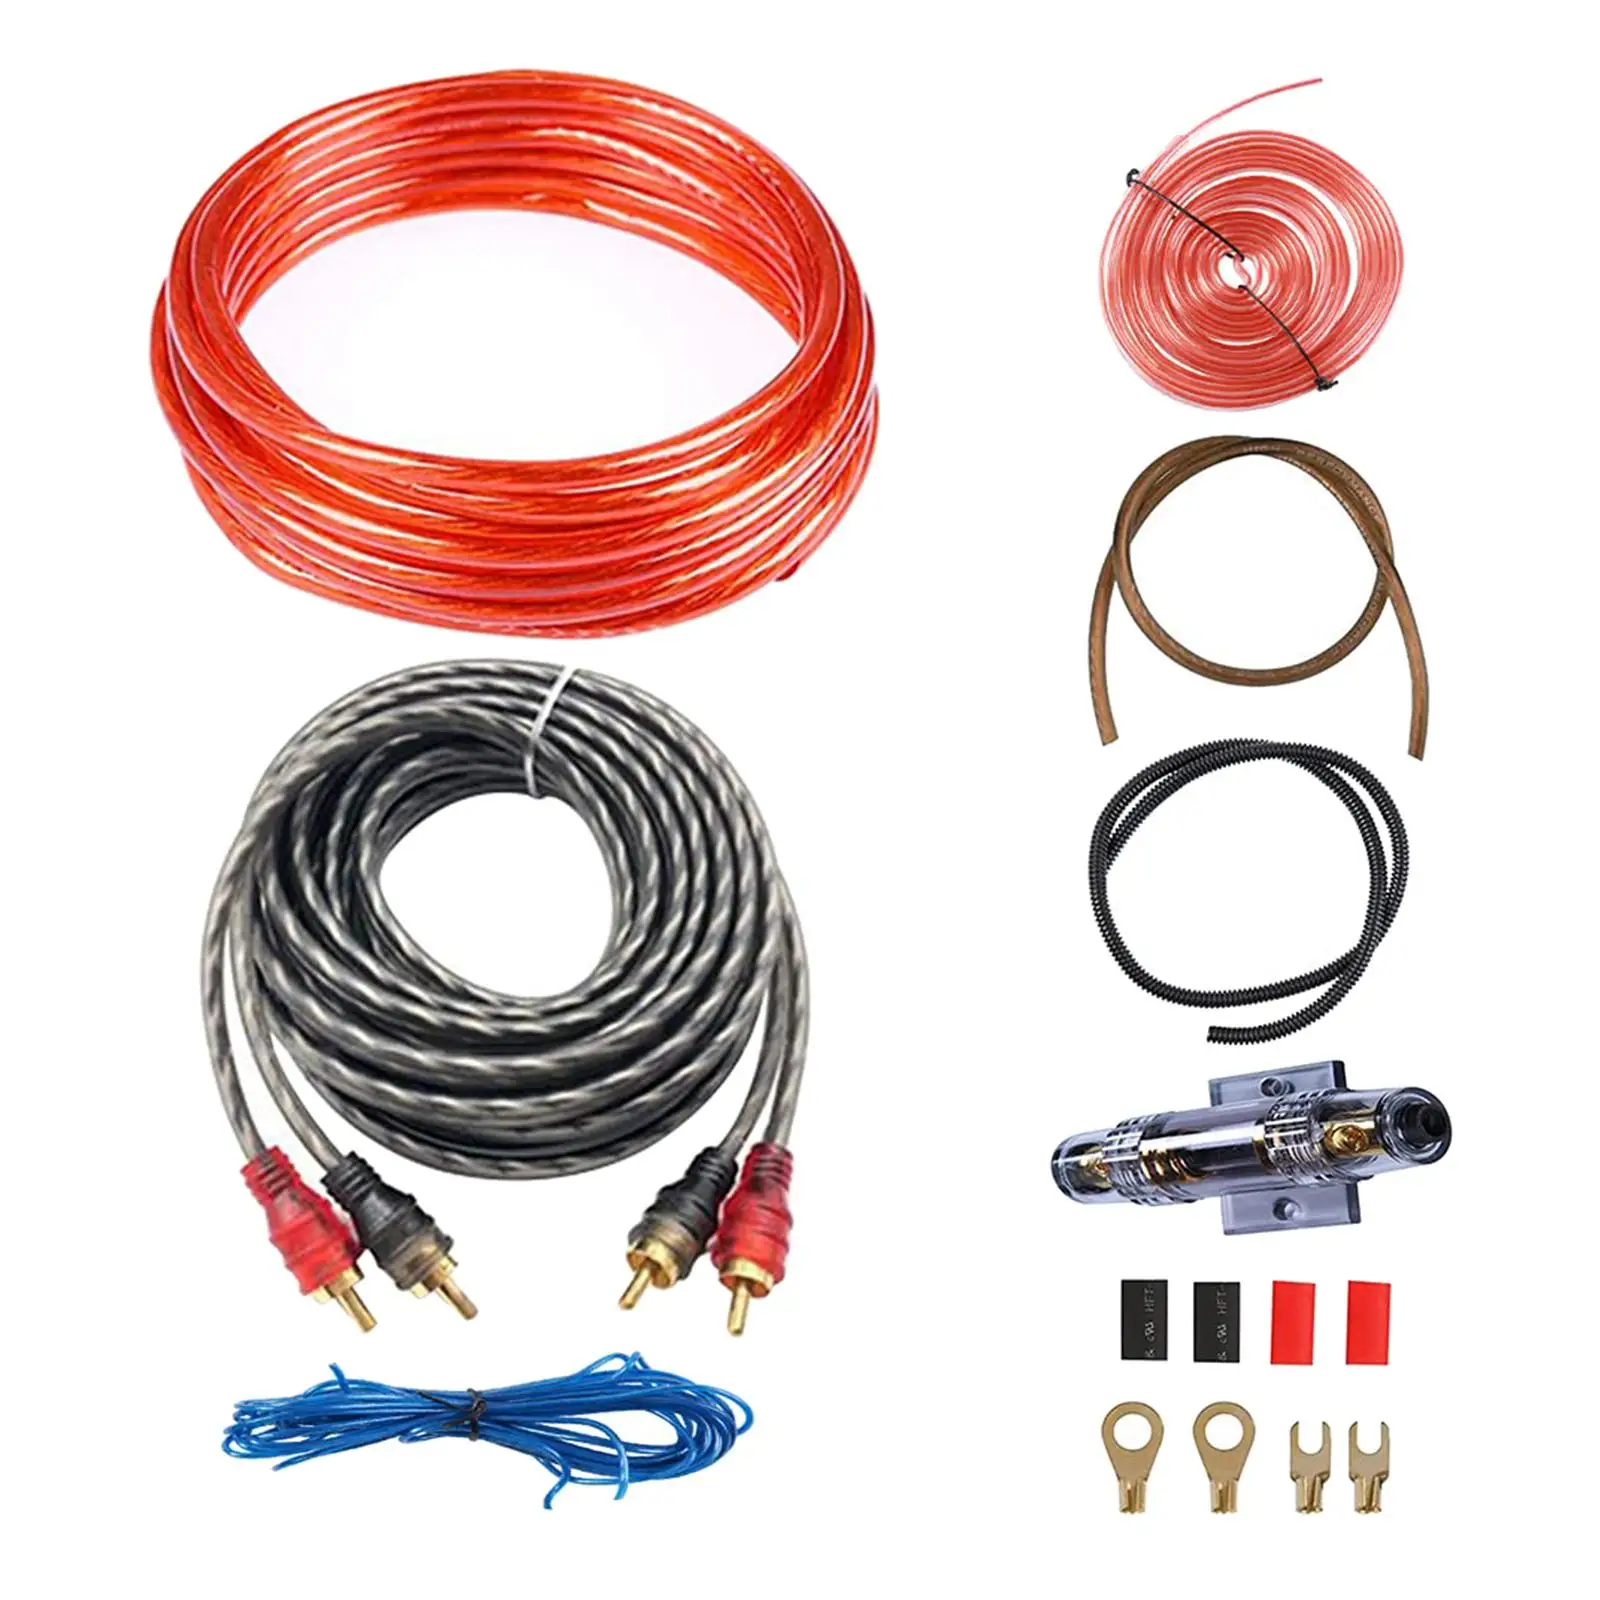 Car Audio Wire Wiring Amplifier Subwoofer Installation Car Power Cord